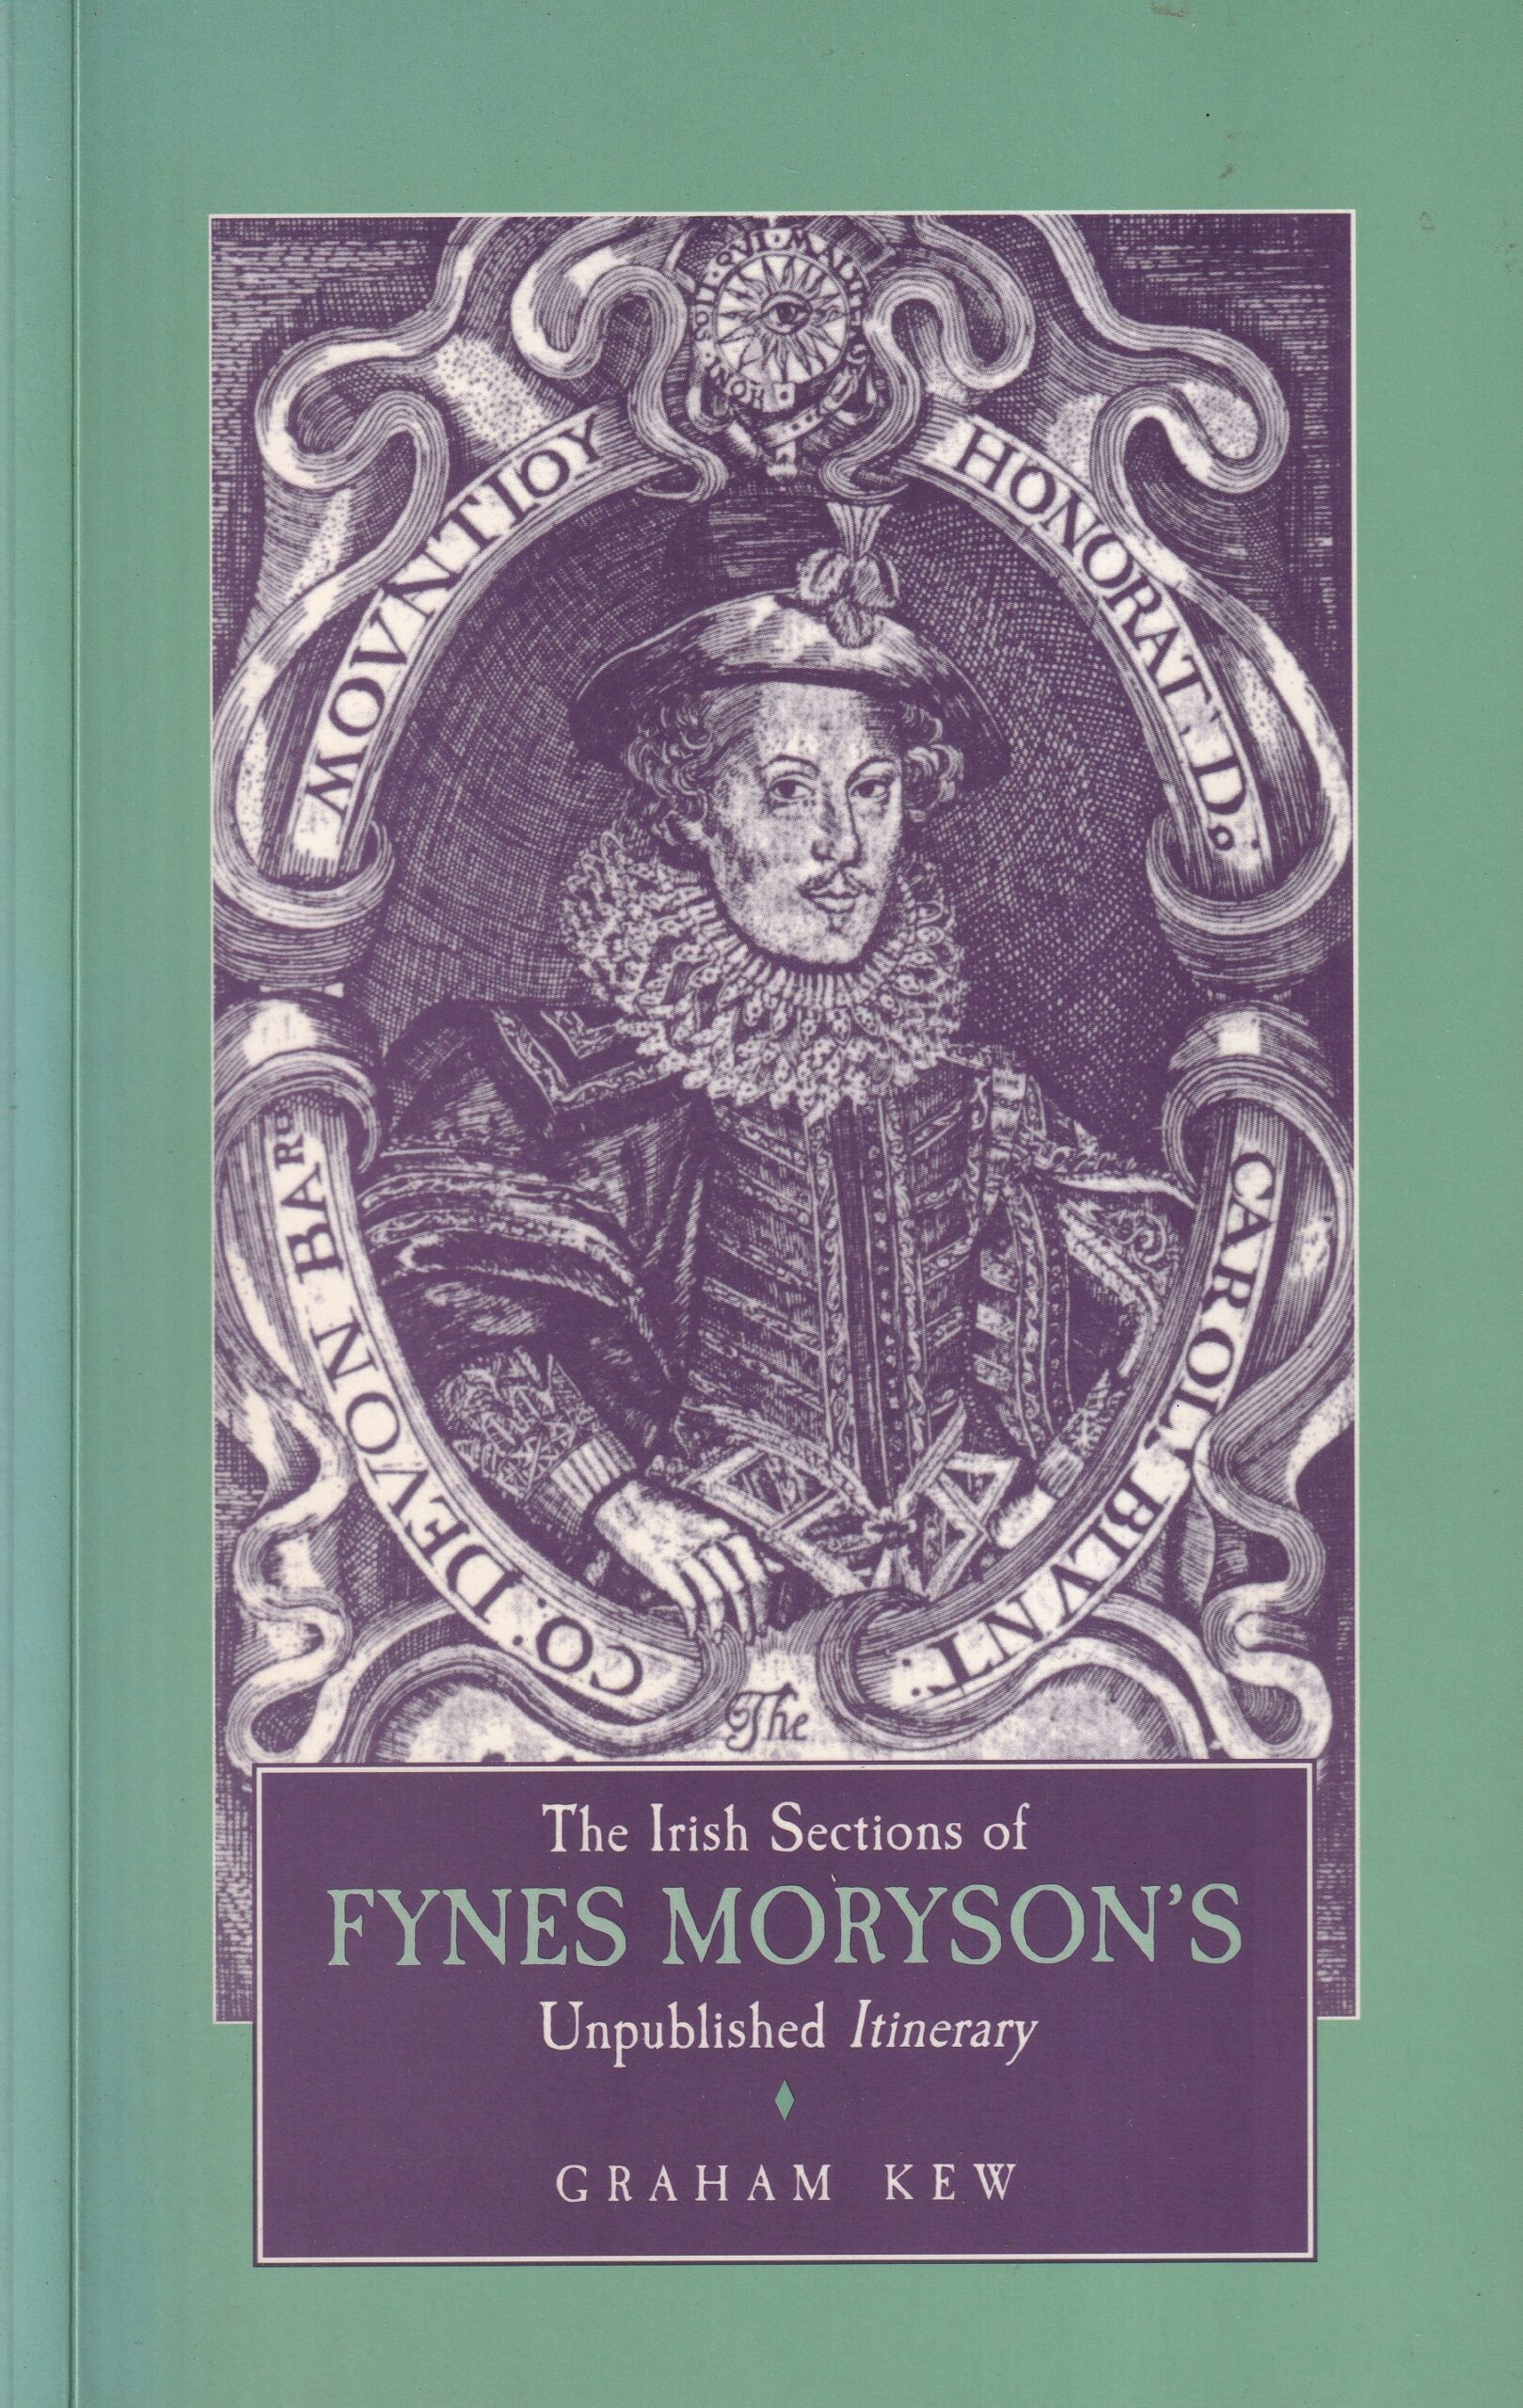 The Irish Sections of Fynes Moryson’s Unpublished Itinerary | Graham Kew | Charlie Byrne's